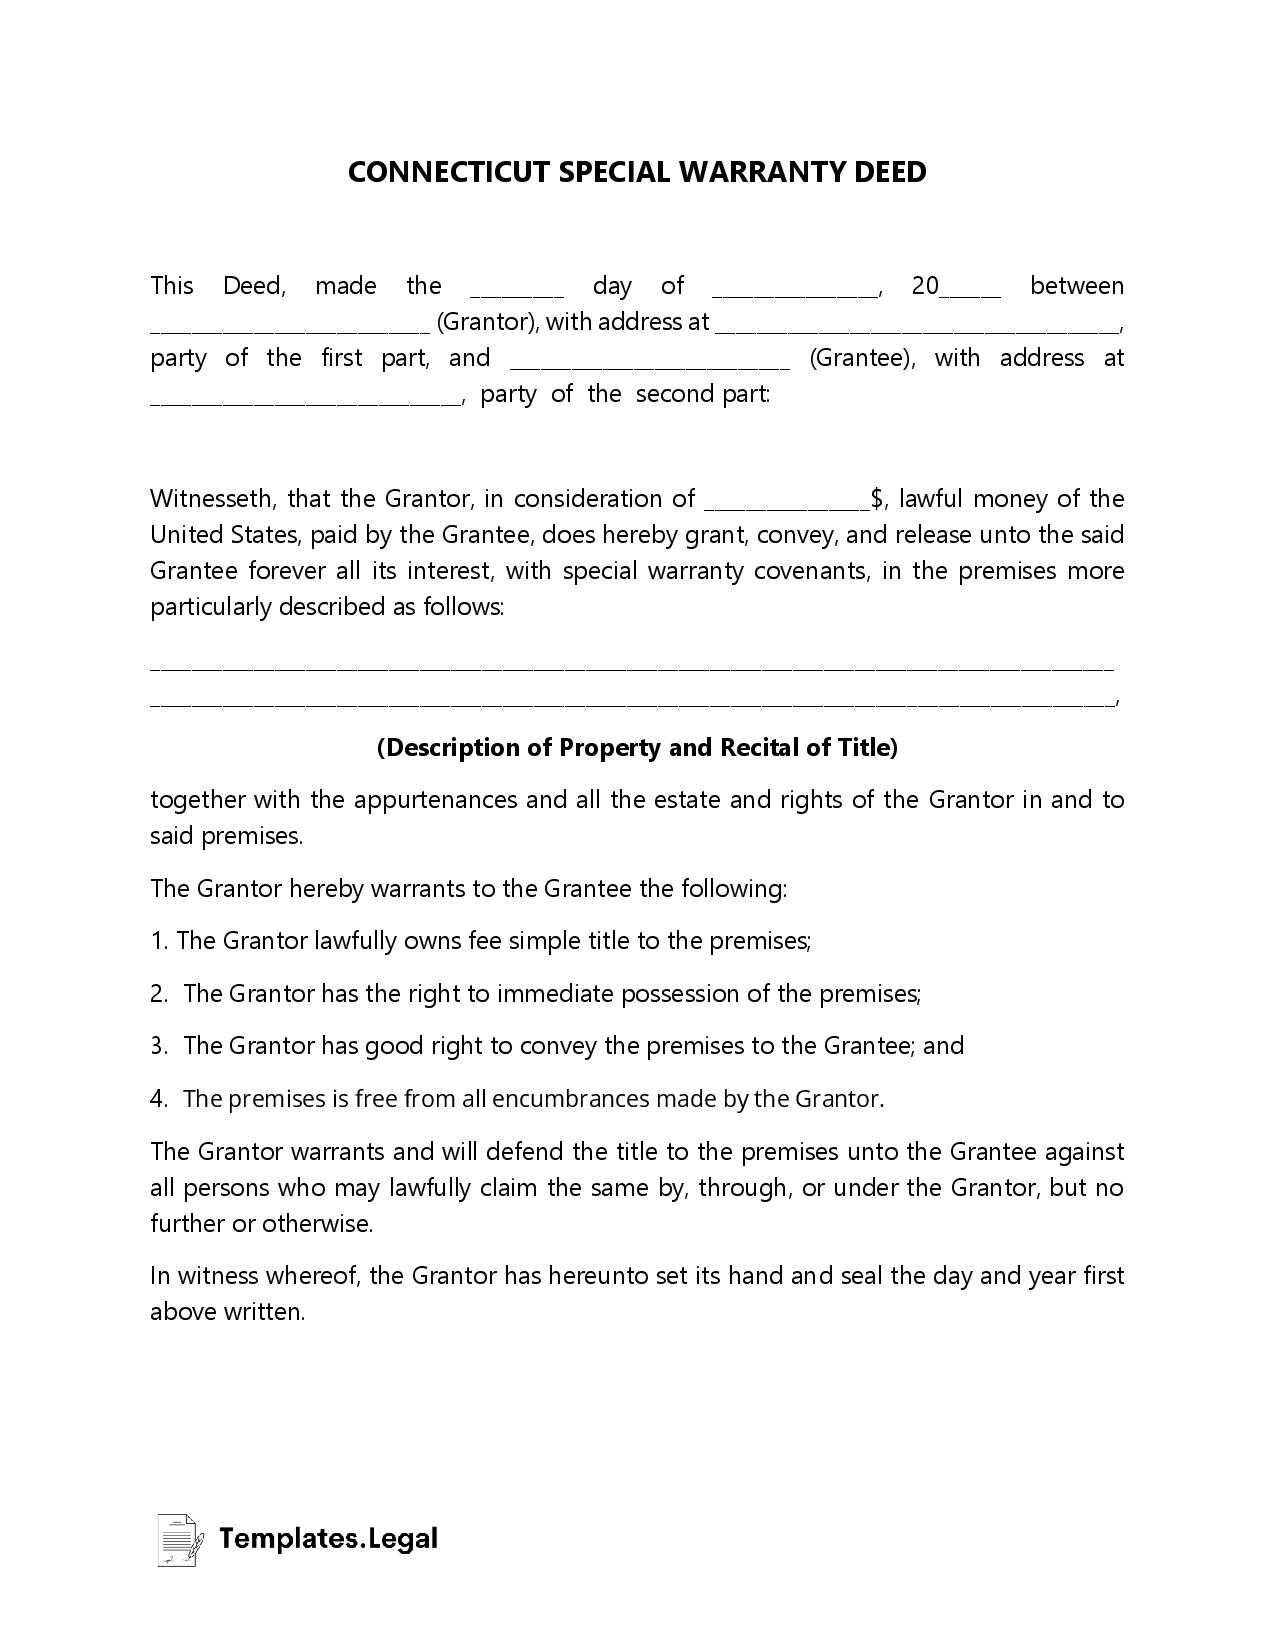 Connecticut Special Warranty Deed - Templates.Legal